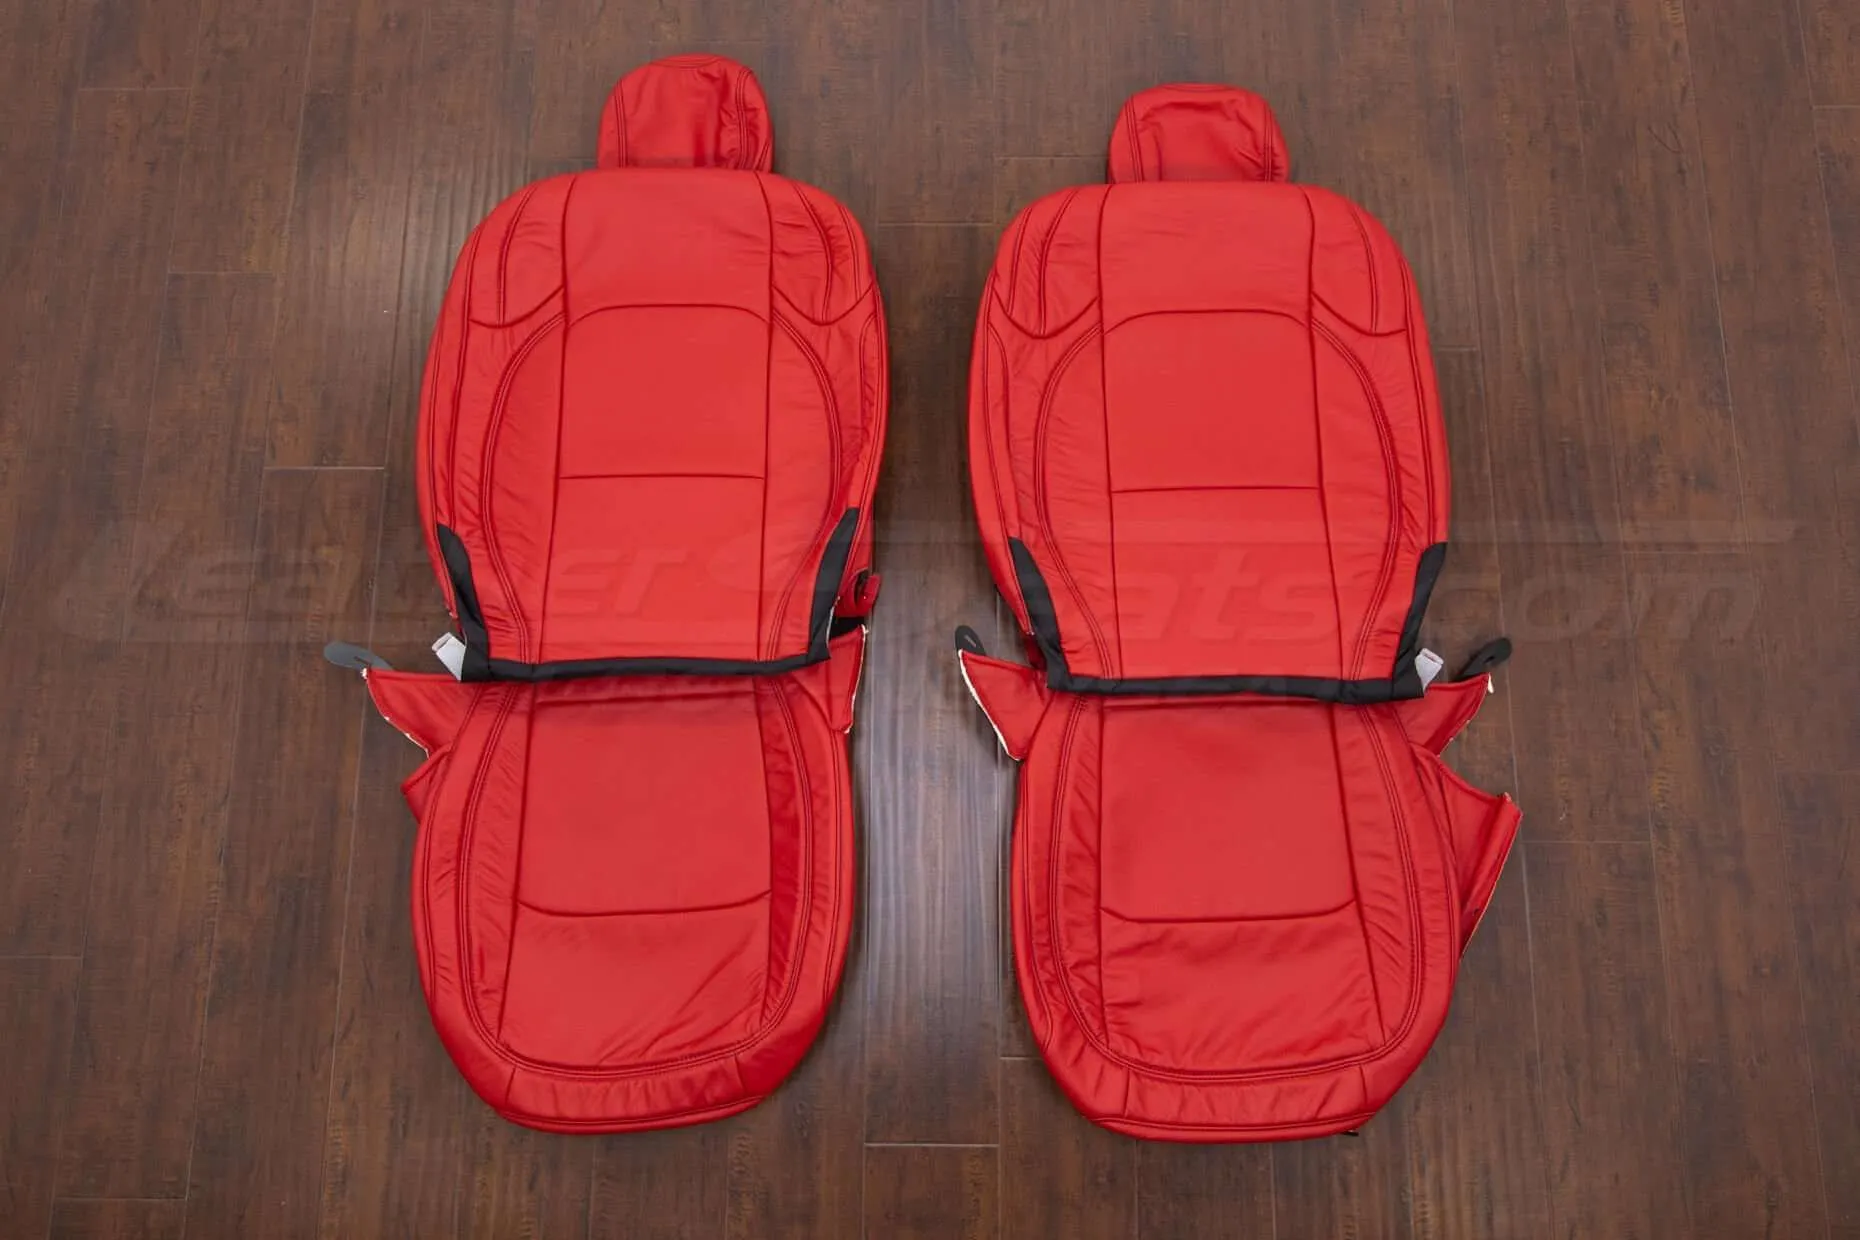 Jeep Wrangler Leather Kit - Bright Red - Front Seat Upholstery